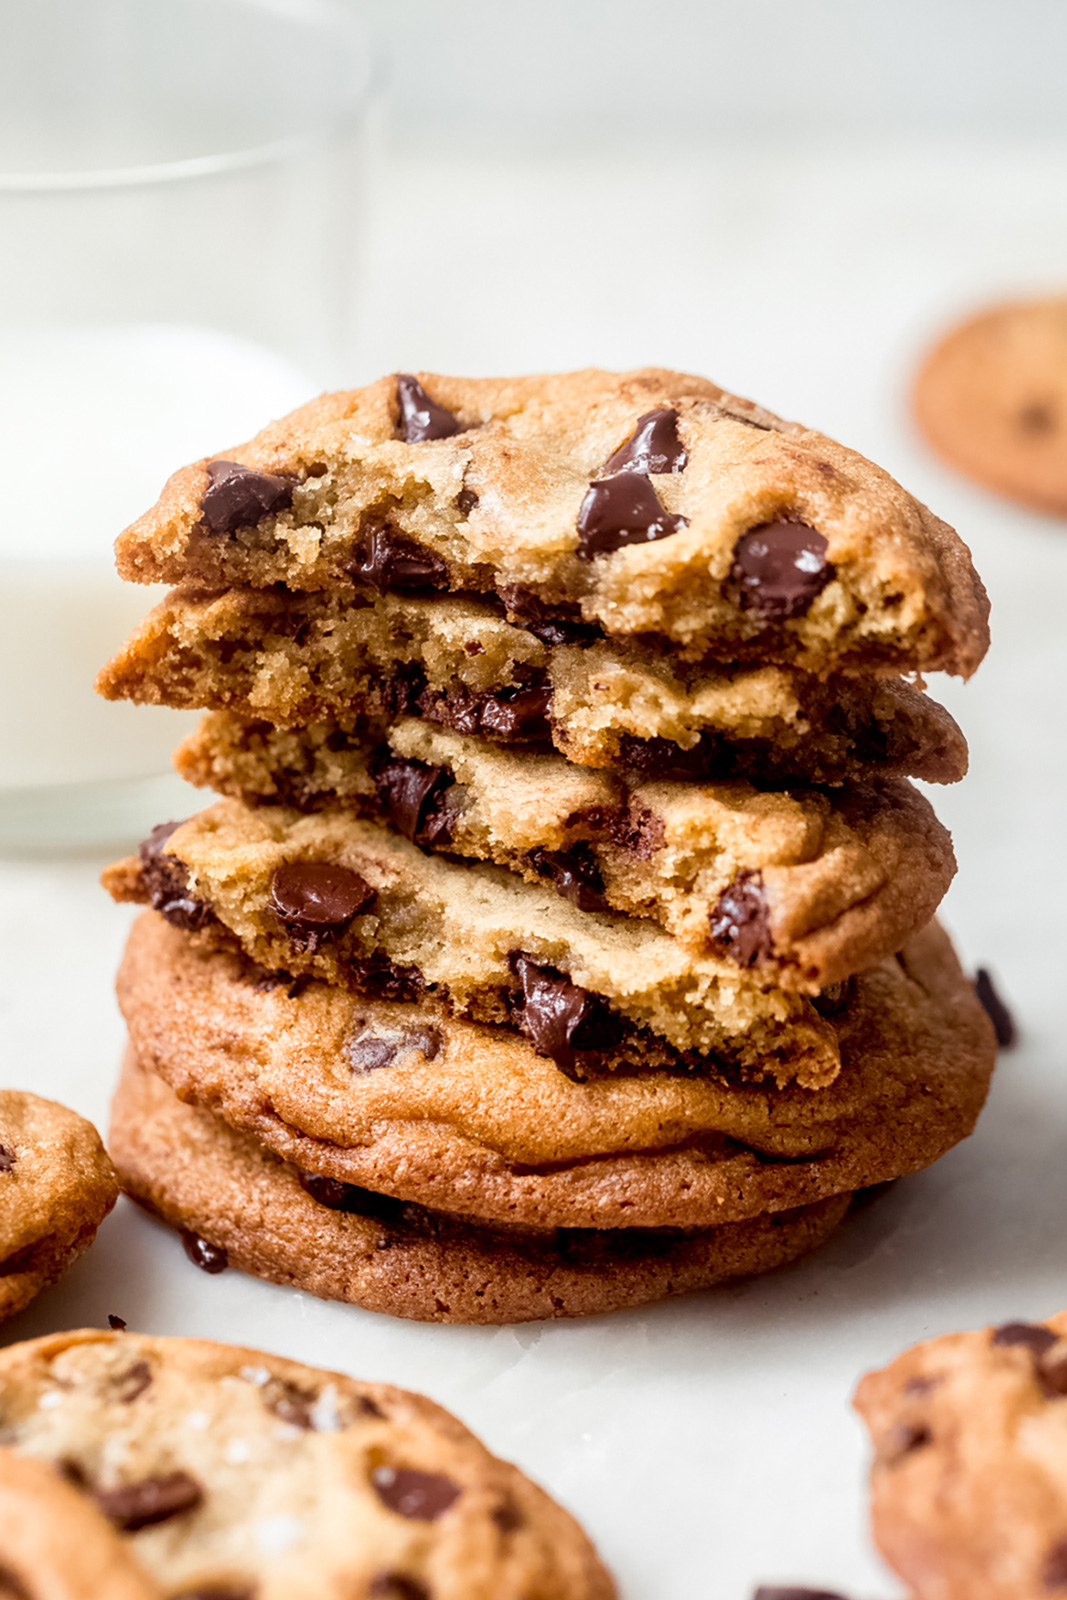 https://littlespicejar.com/wp-content/uploads/2020/05/Extra-Chewy-Chocolate-Chip-Cookies-232.jpg